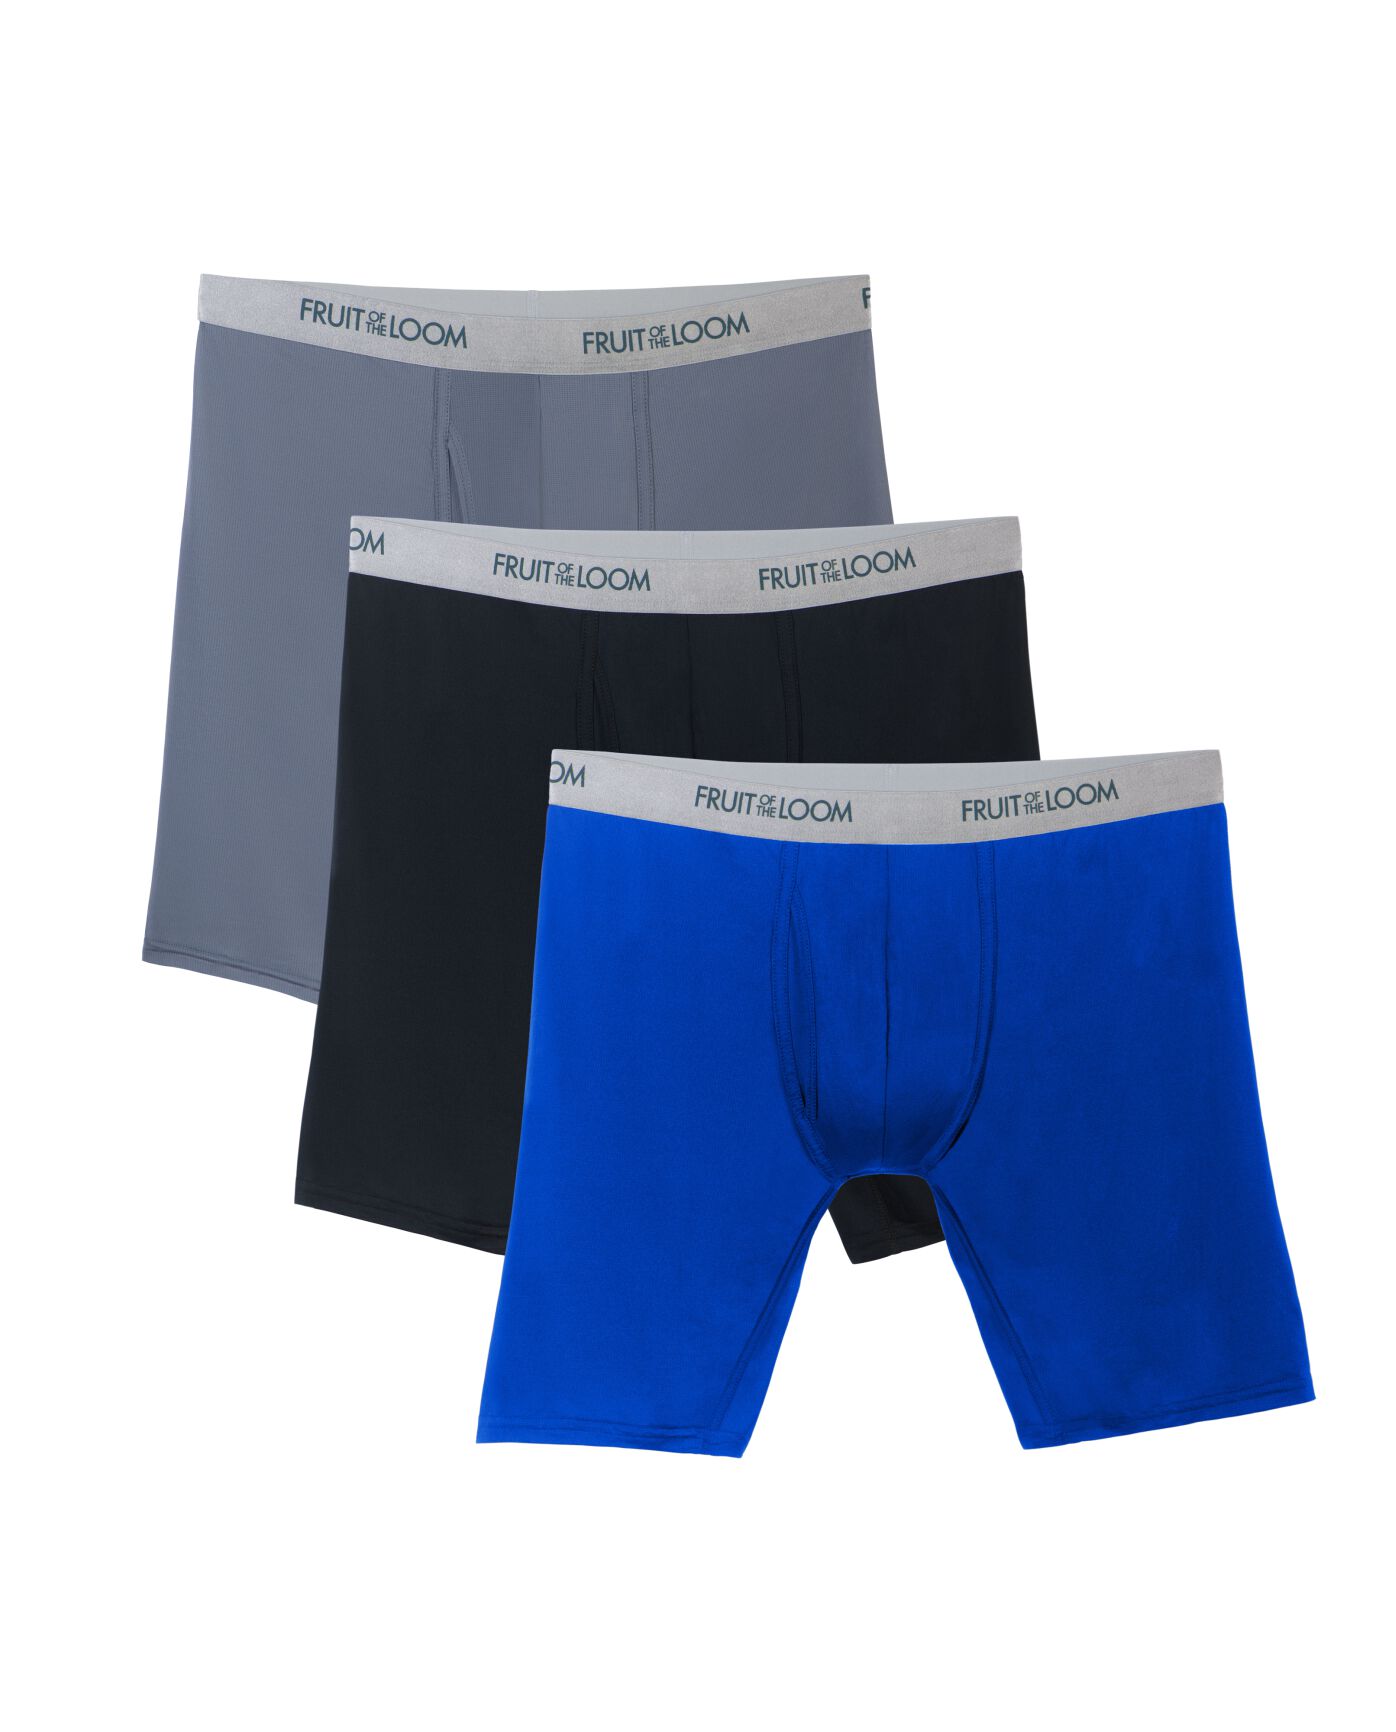 Fruit of the Loom Everlight Breathable Long Leg 3-Pack Boxer Briefs - Size  3XL